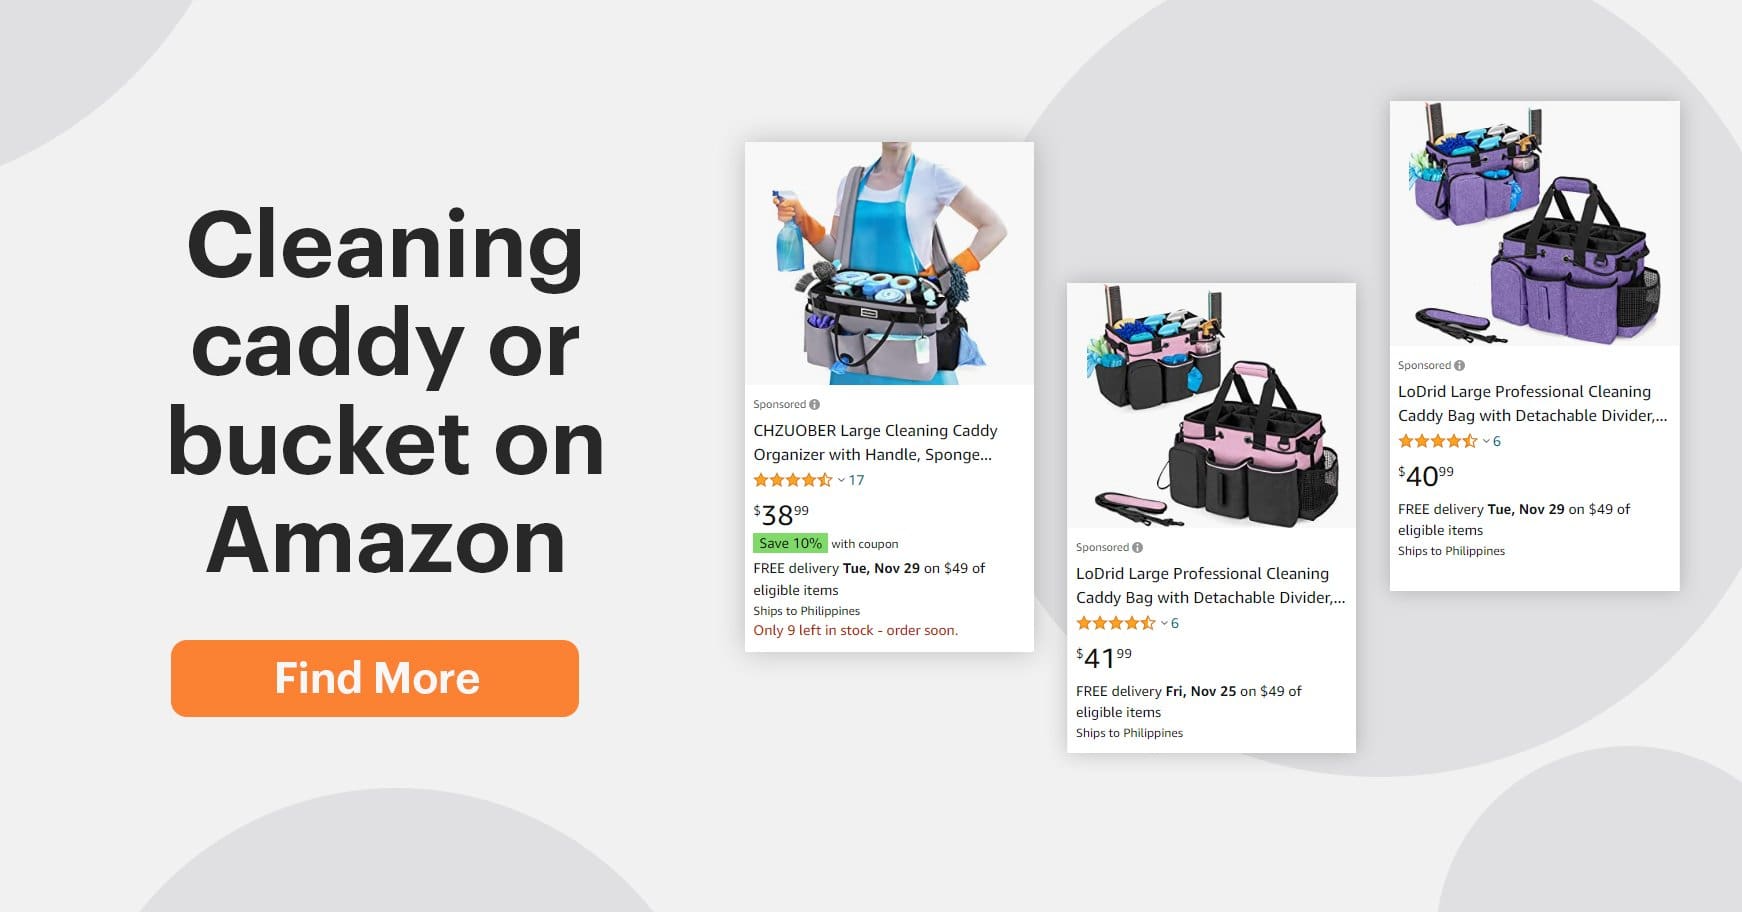 Screenshot of cleaning caddy from Amazon website